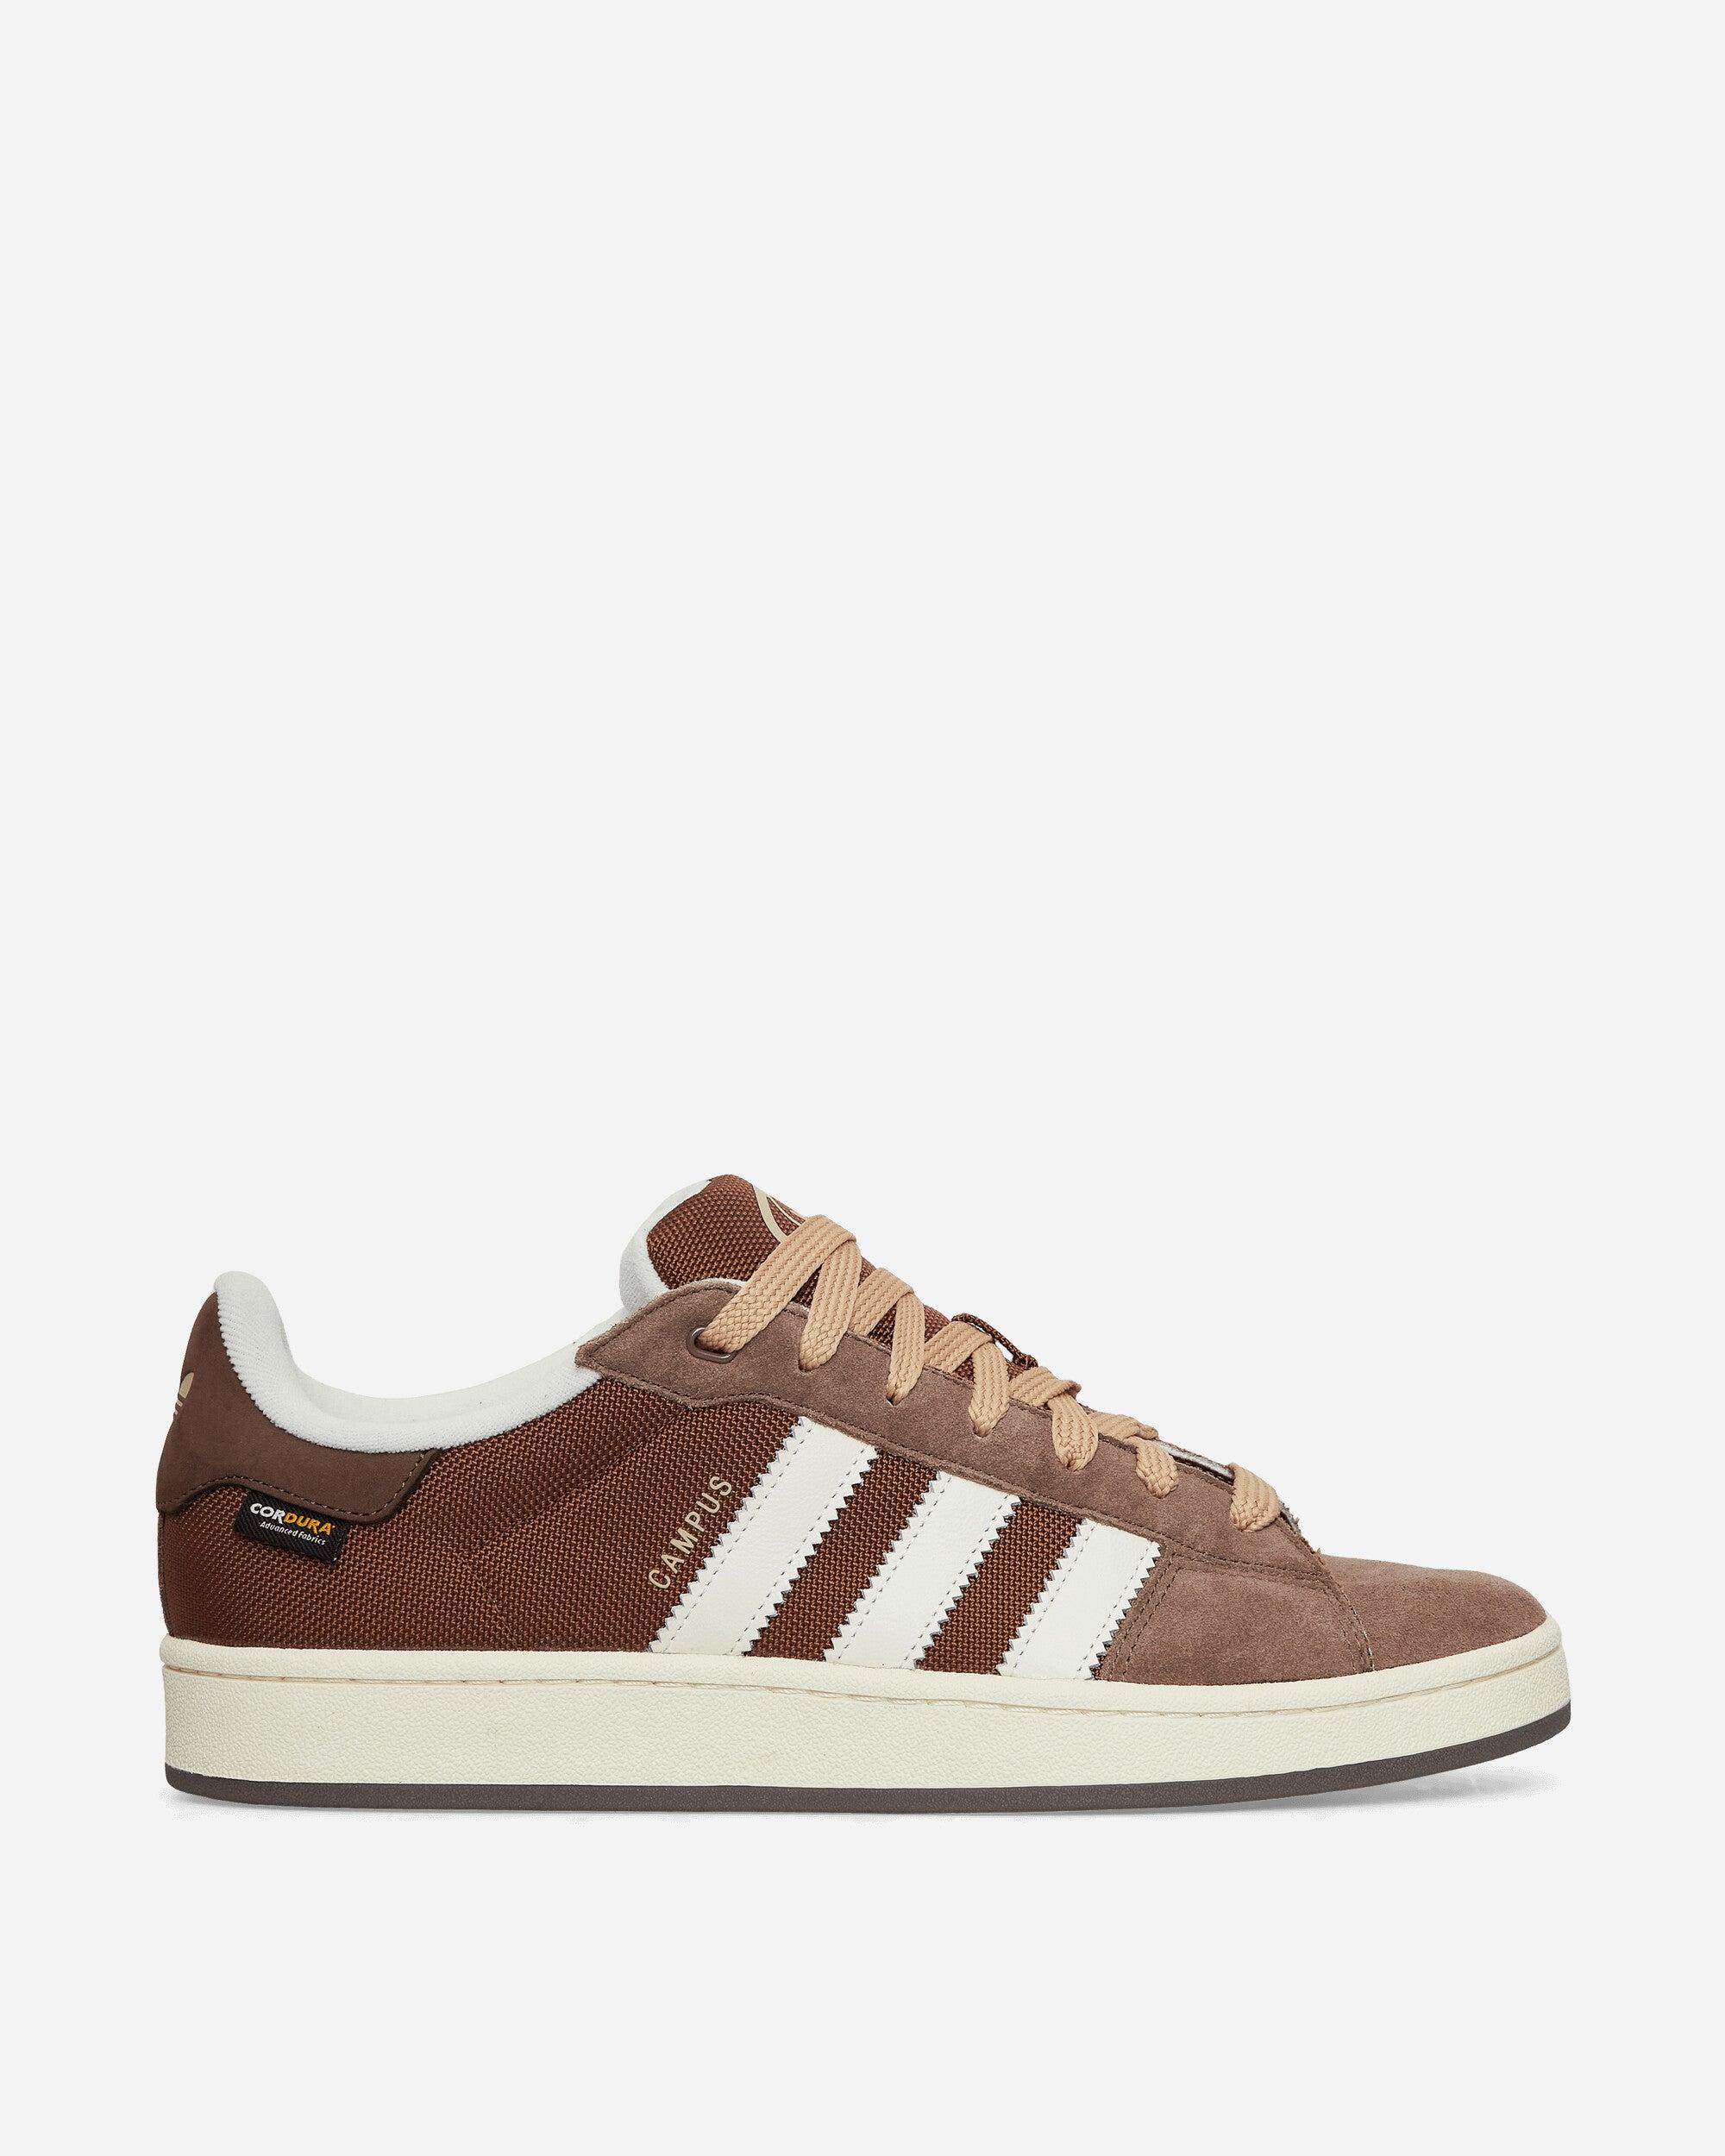 Lyst / Preloved | Strata for White Sneaker Men Off Earth Campus / 00s Brown adidas